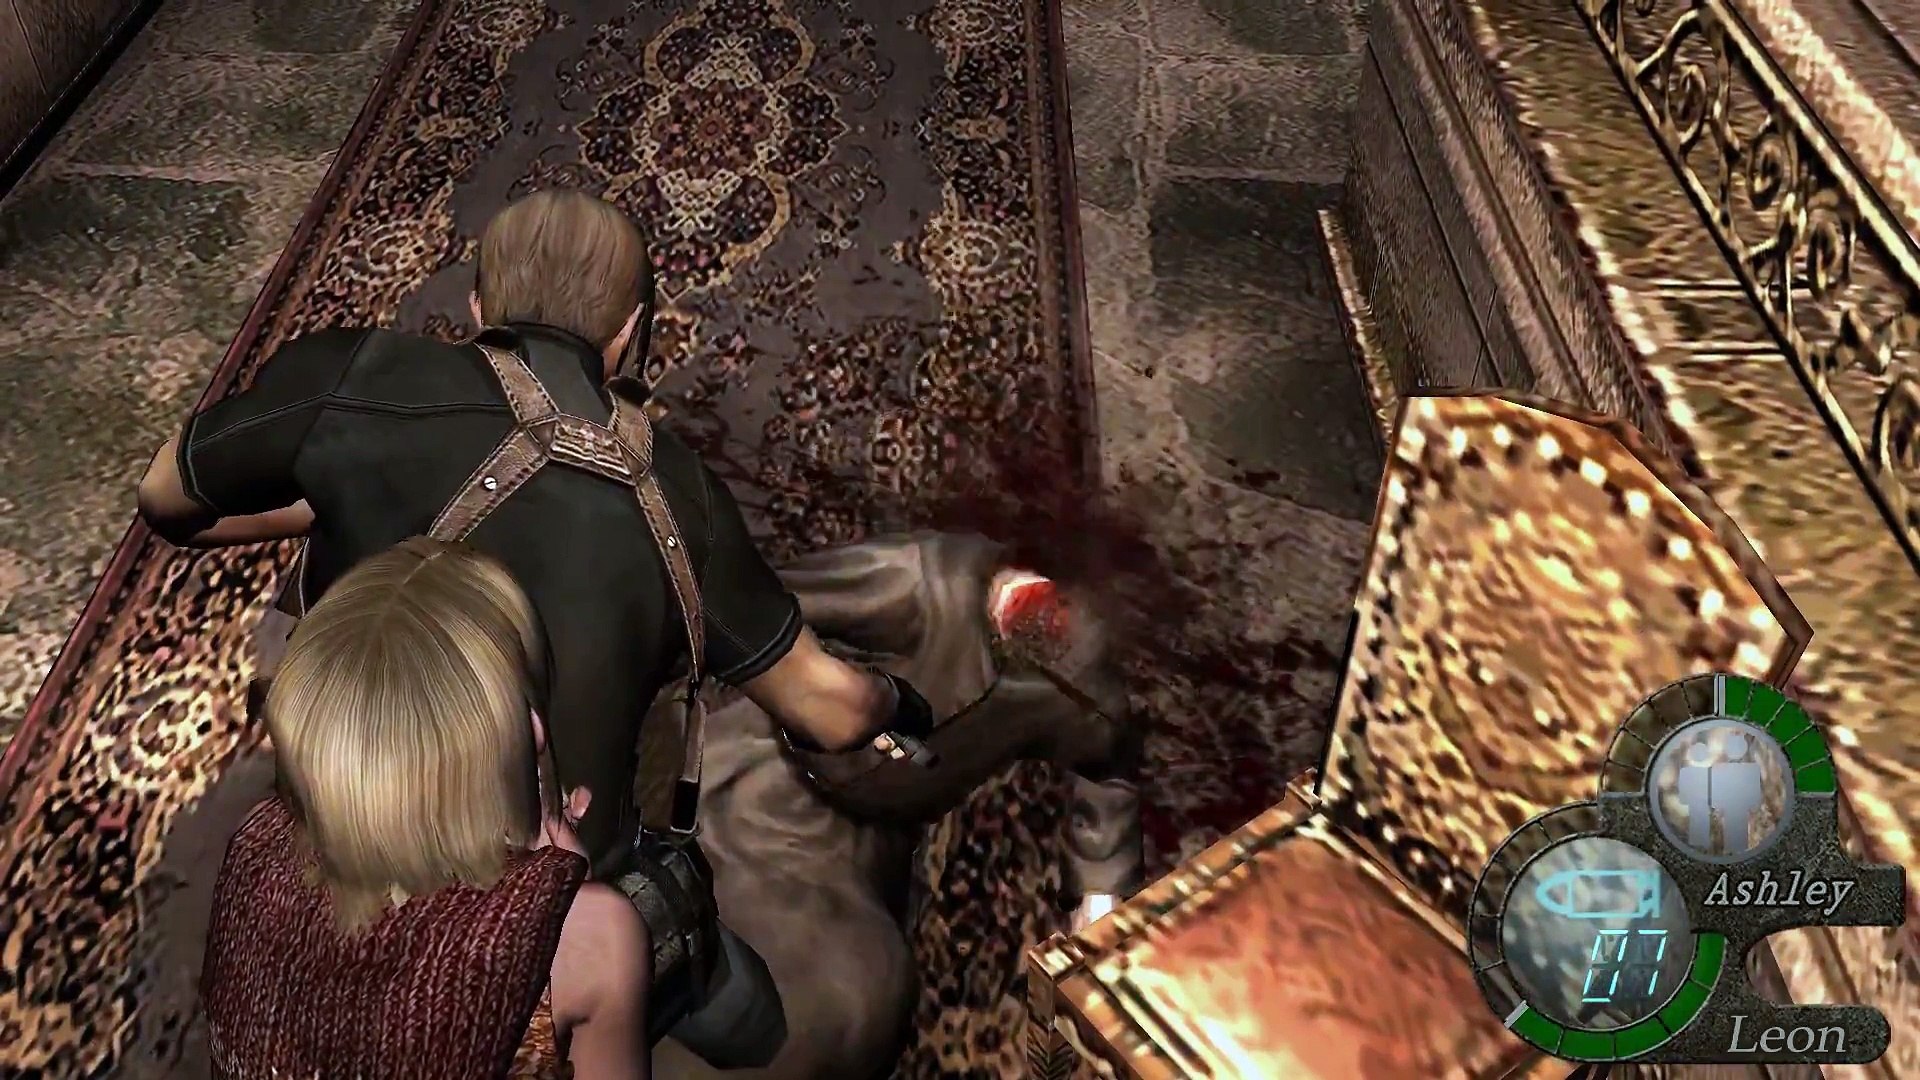 This Resident Evil 4 Remake Mod Makes Ashely Playable